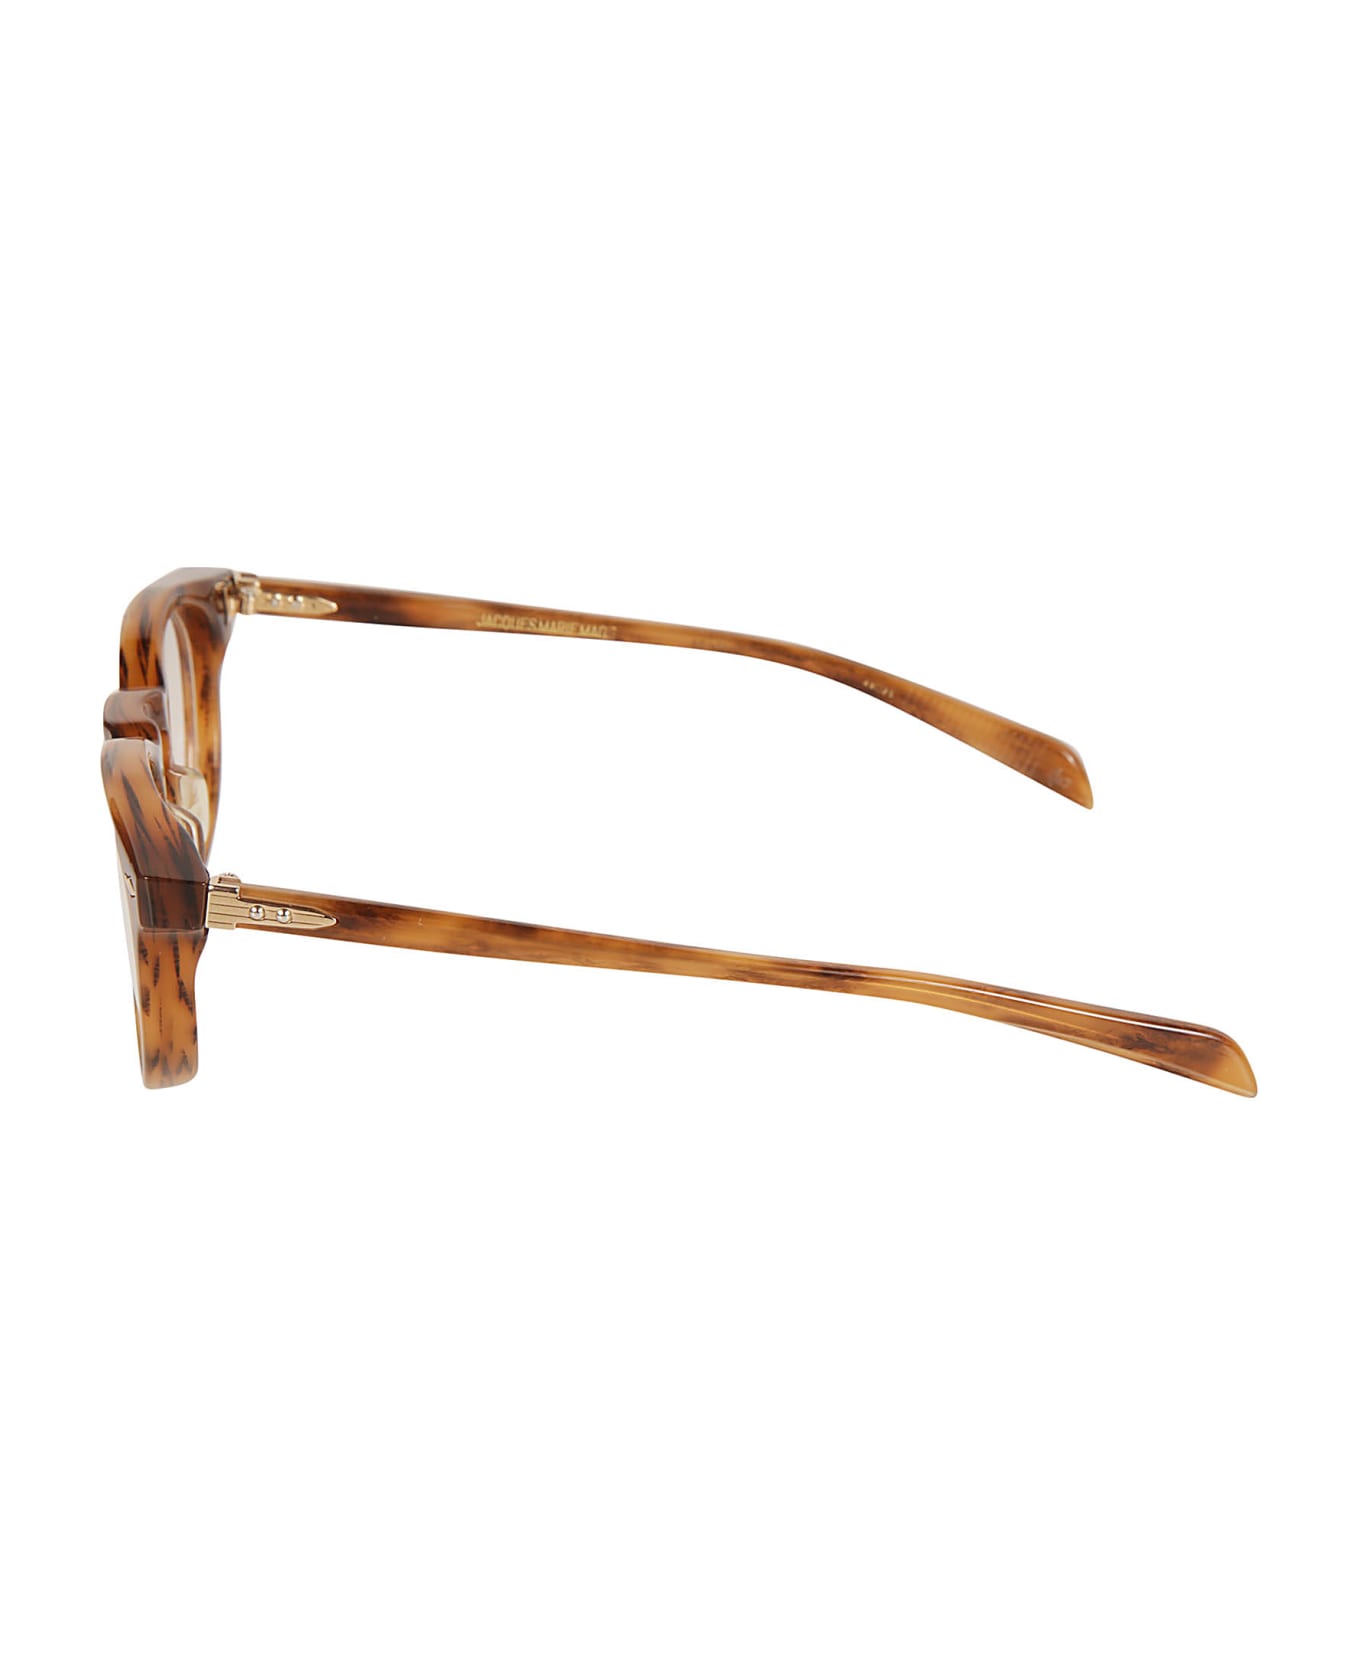 Jacques Marie Mage Round Classic Frame - oak